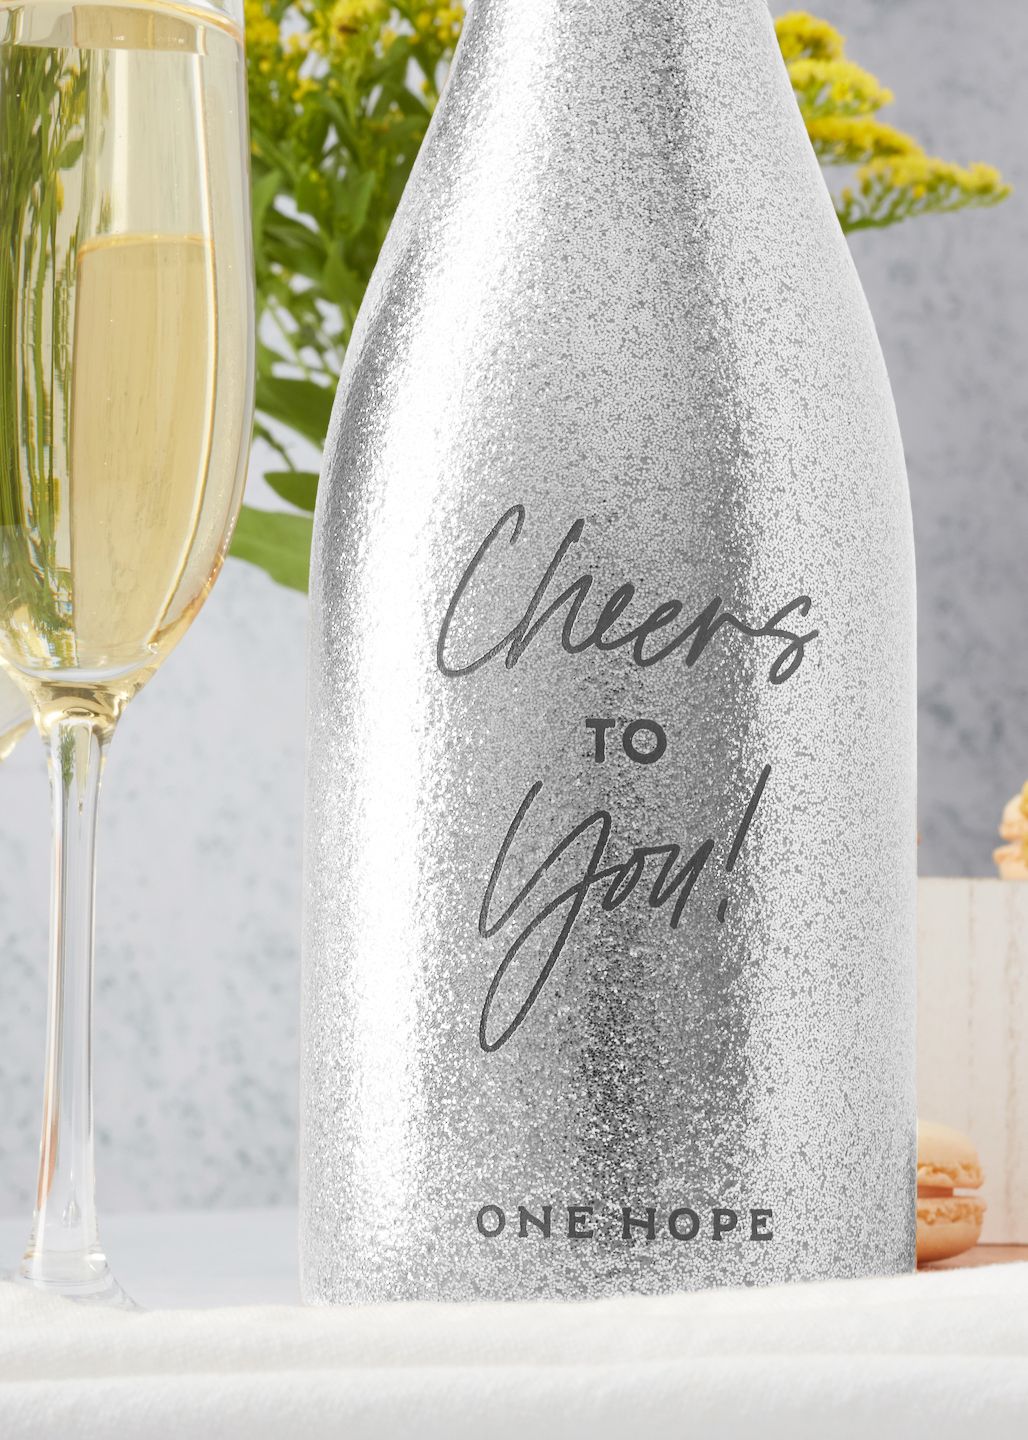 Cheers' Silver And Gold Glitter Wine Bottle Bag